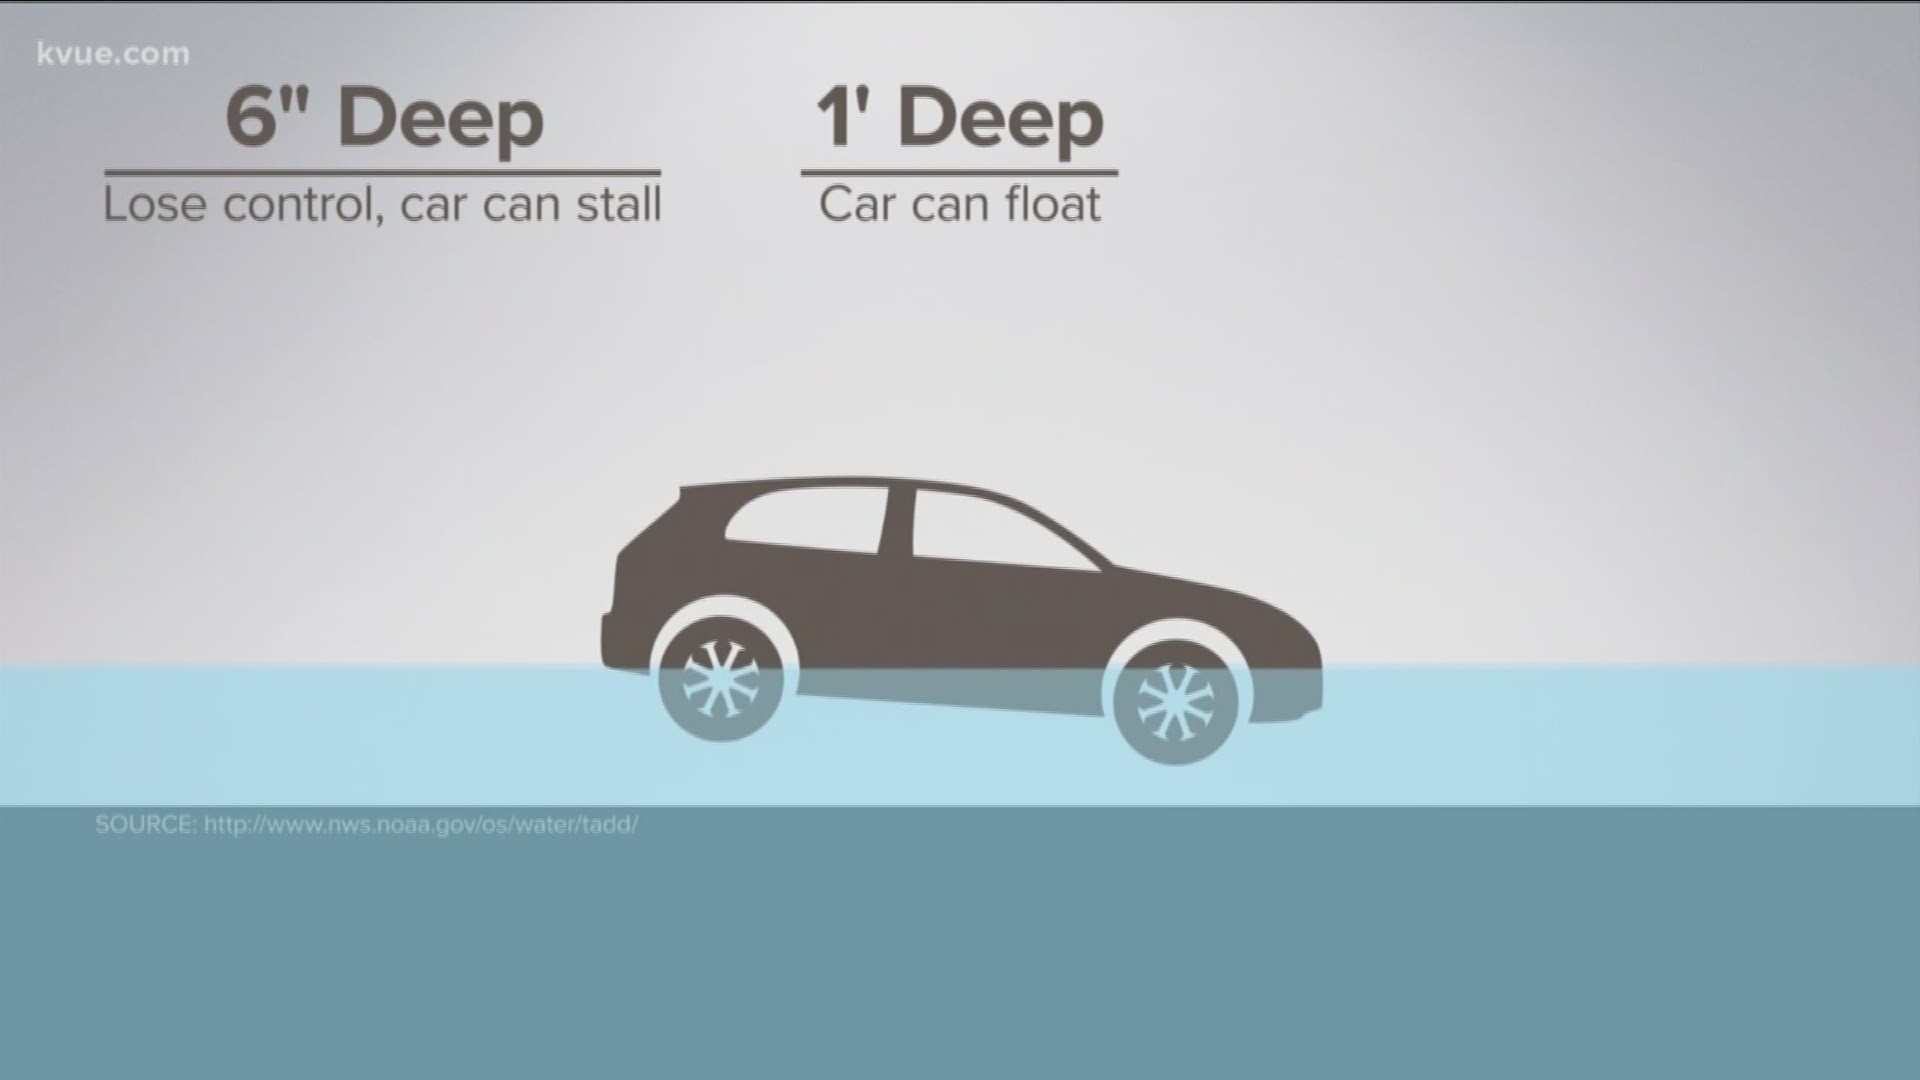 As more rain heads through Central Texas, it's important to remember your safety and that it's not worth risking it when it comes to low water crossings. Be sure to Turn Around and Don't Drown!